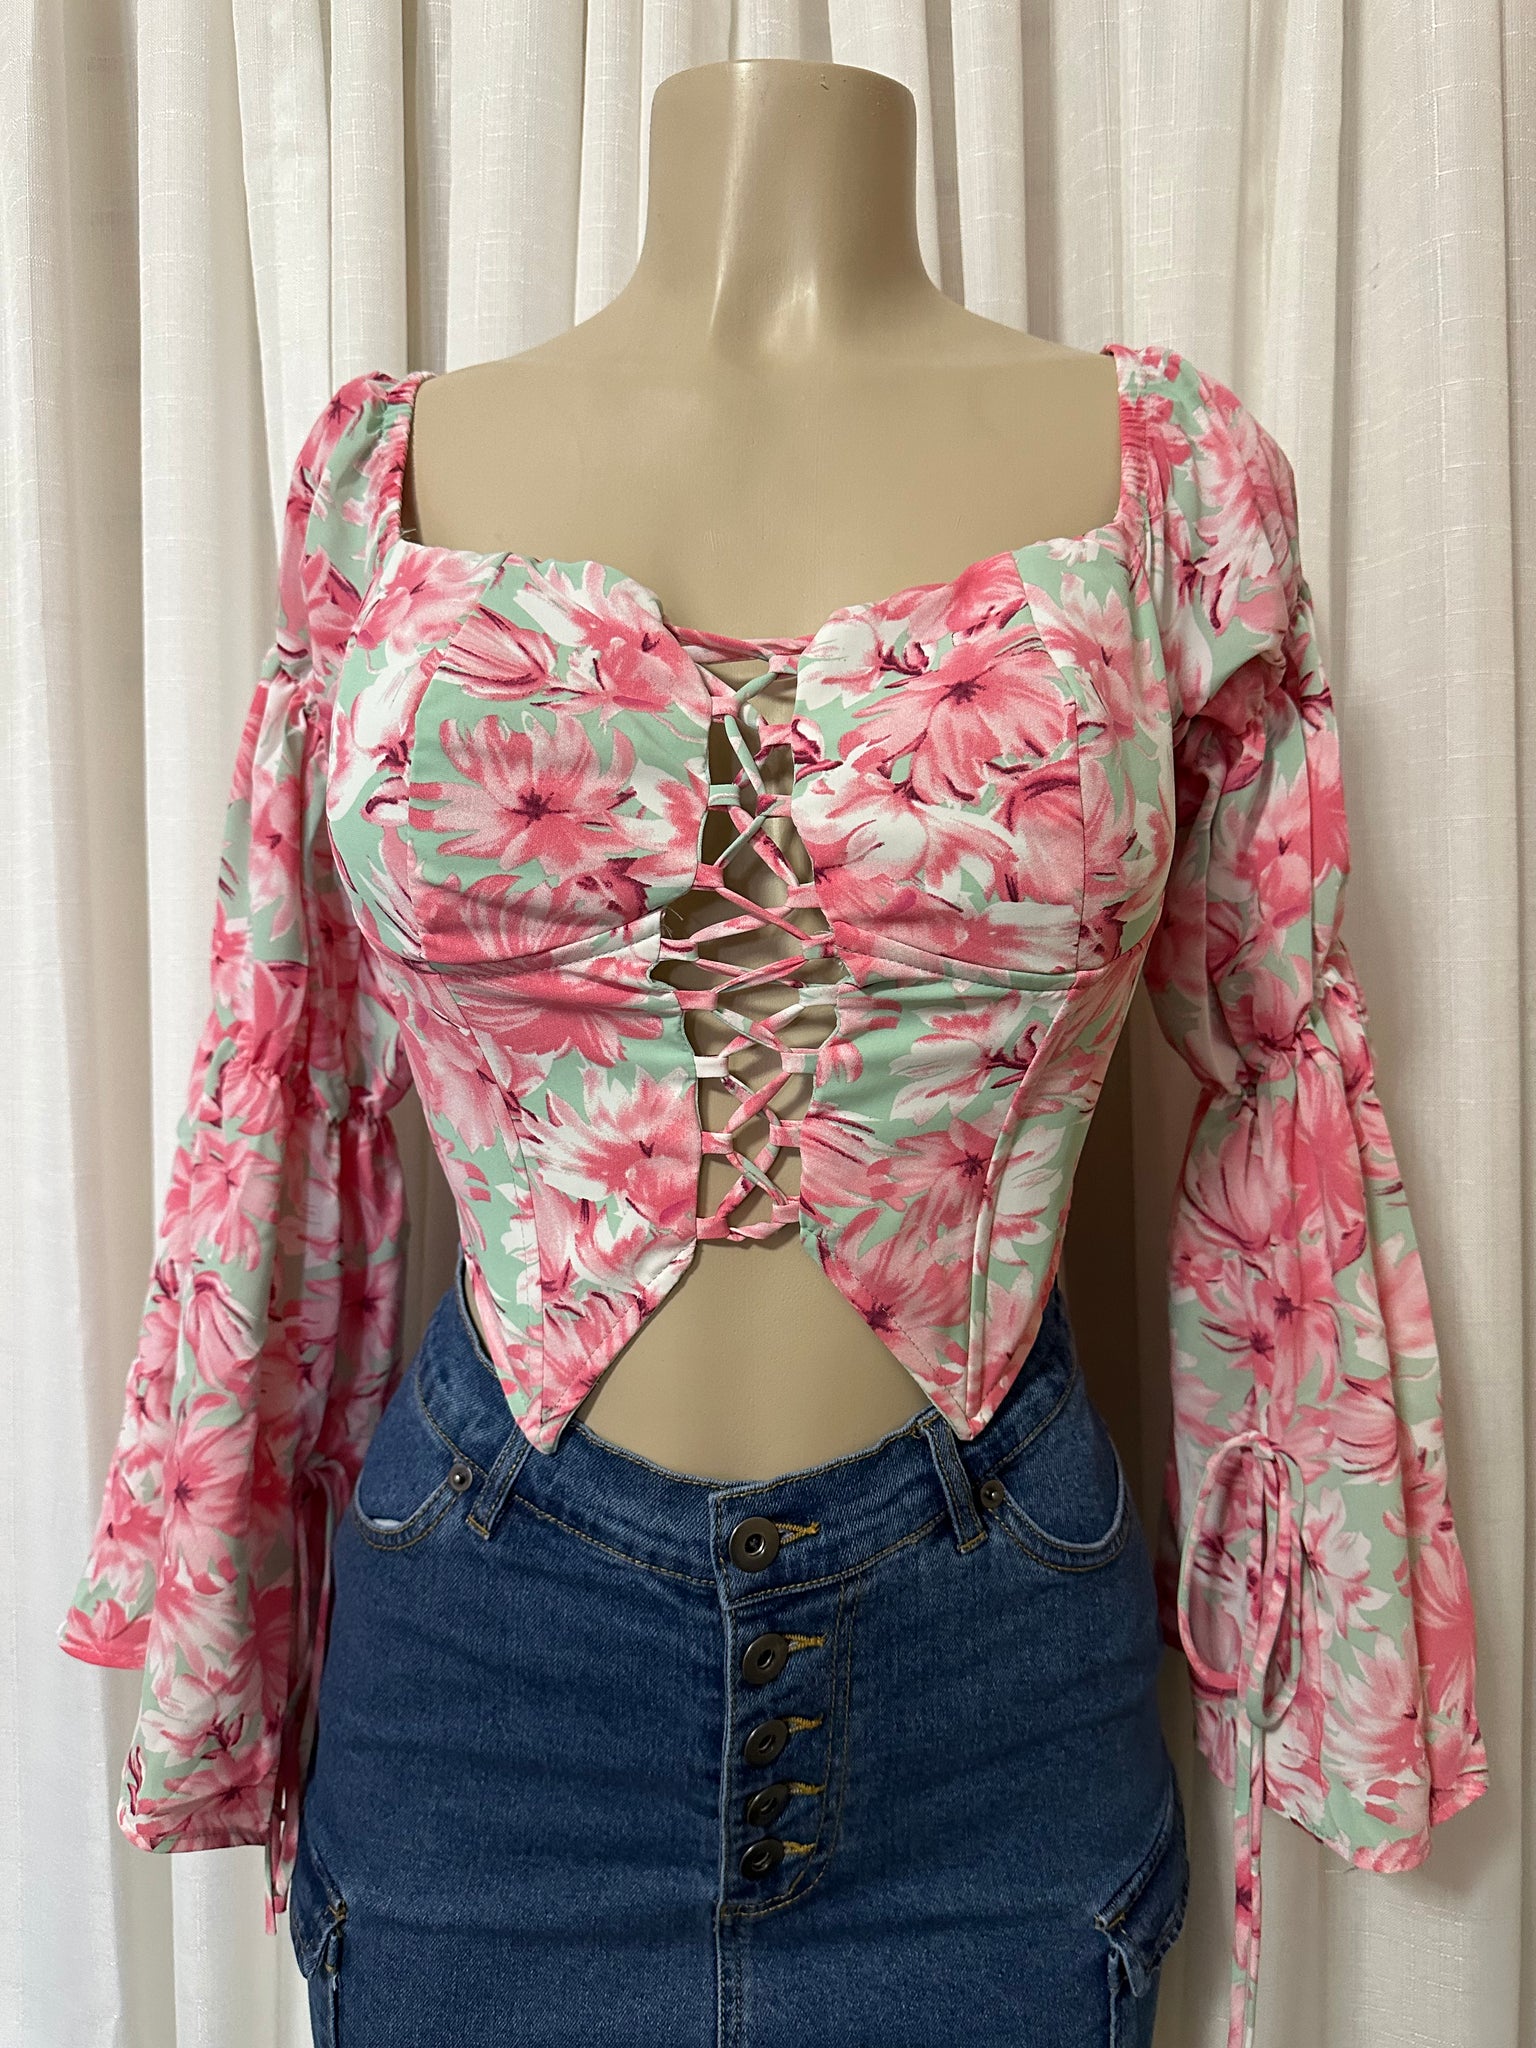 The “Brunch Babe” Corset Top